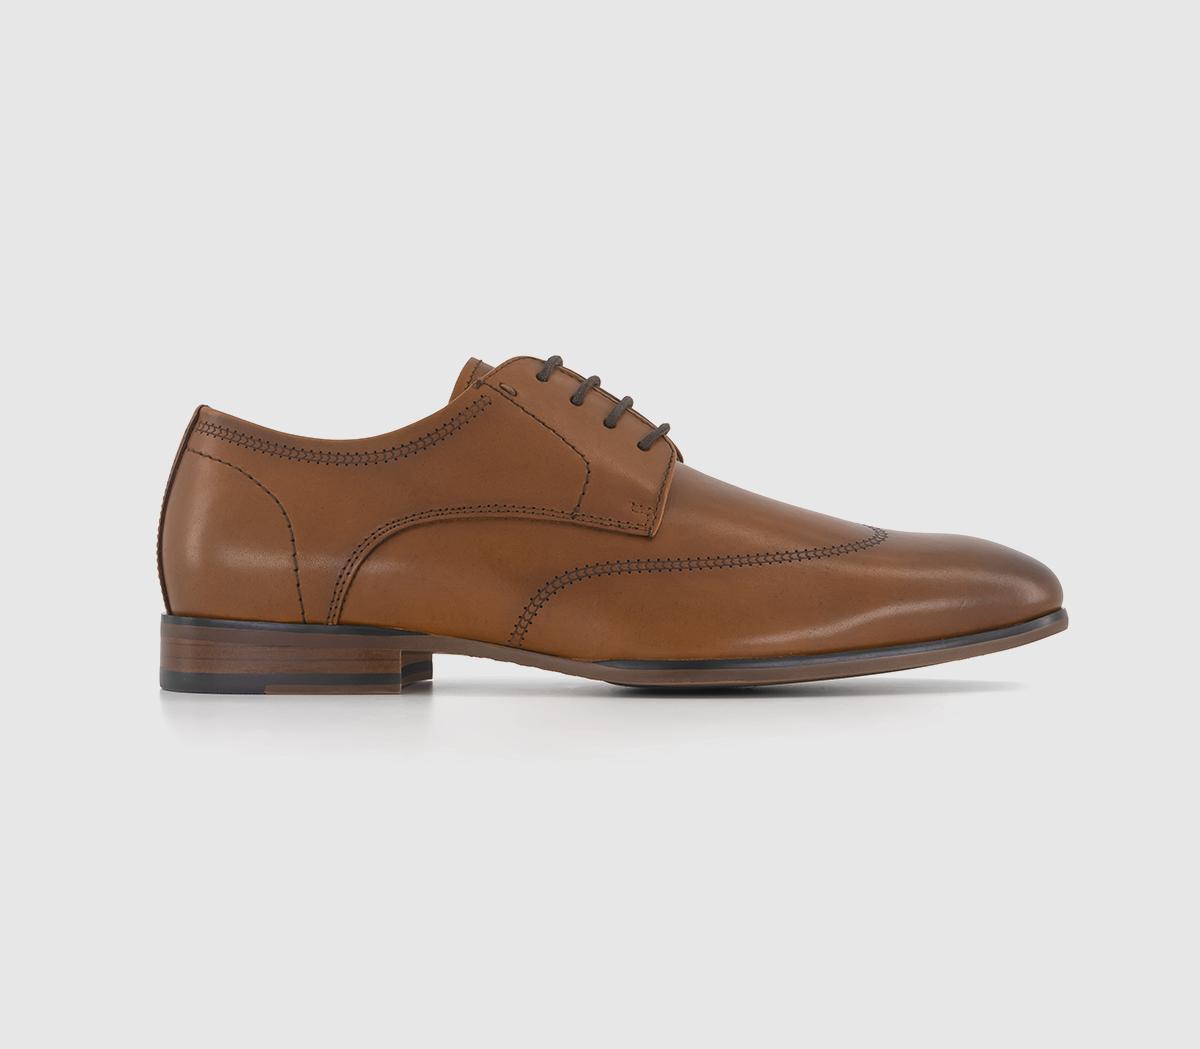 OFFICEMagnus Wingcap Leather Oxford ShoesTan Leather